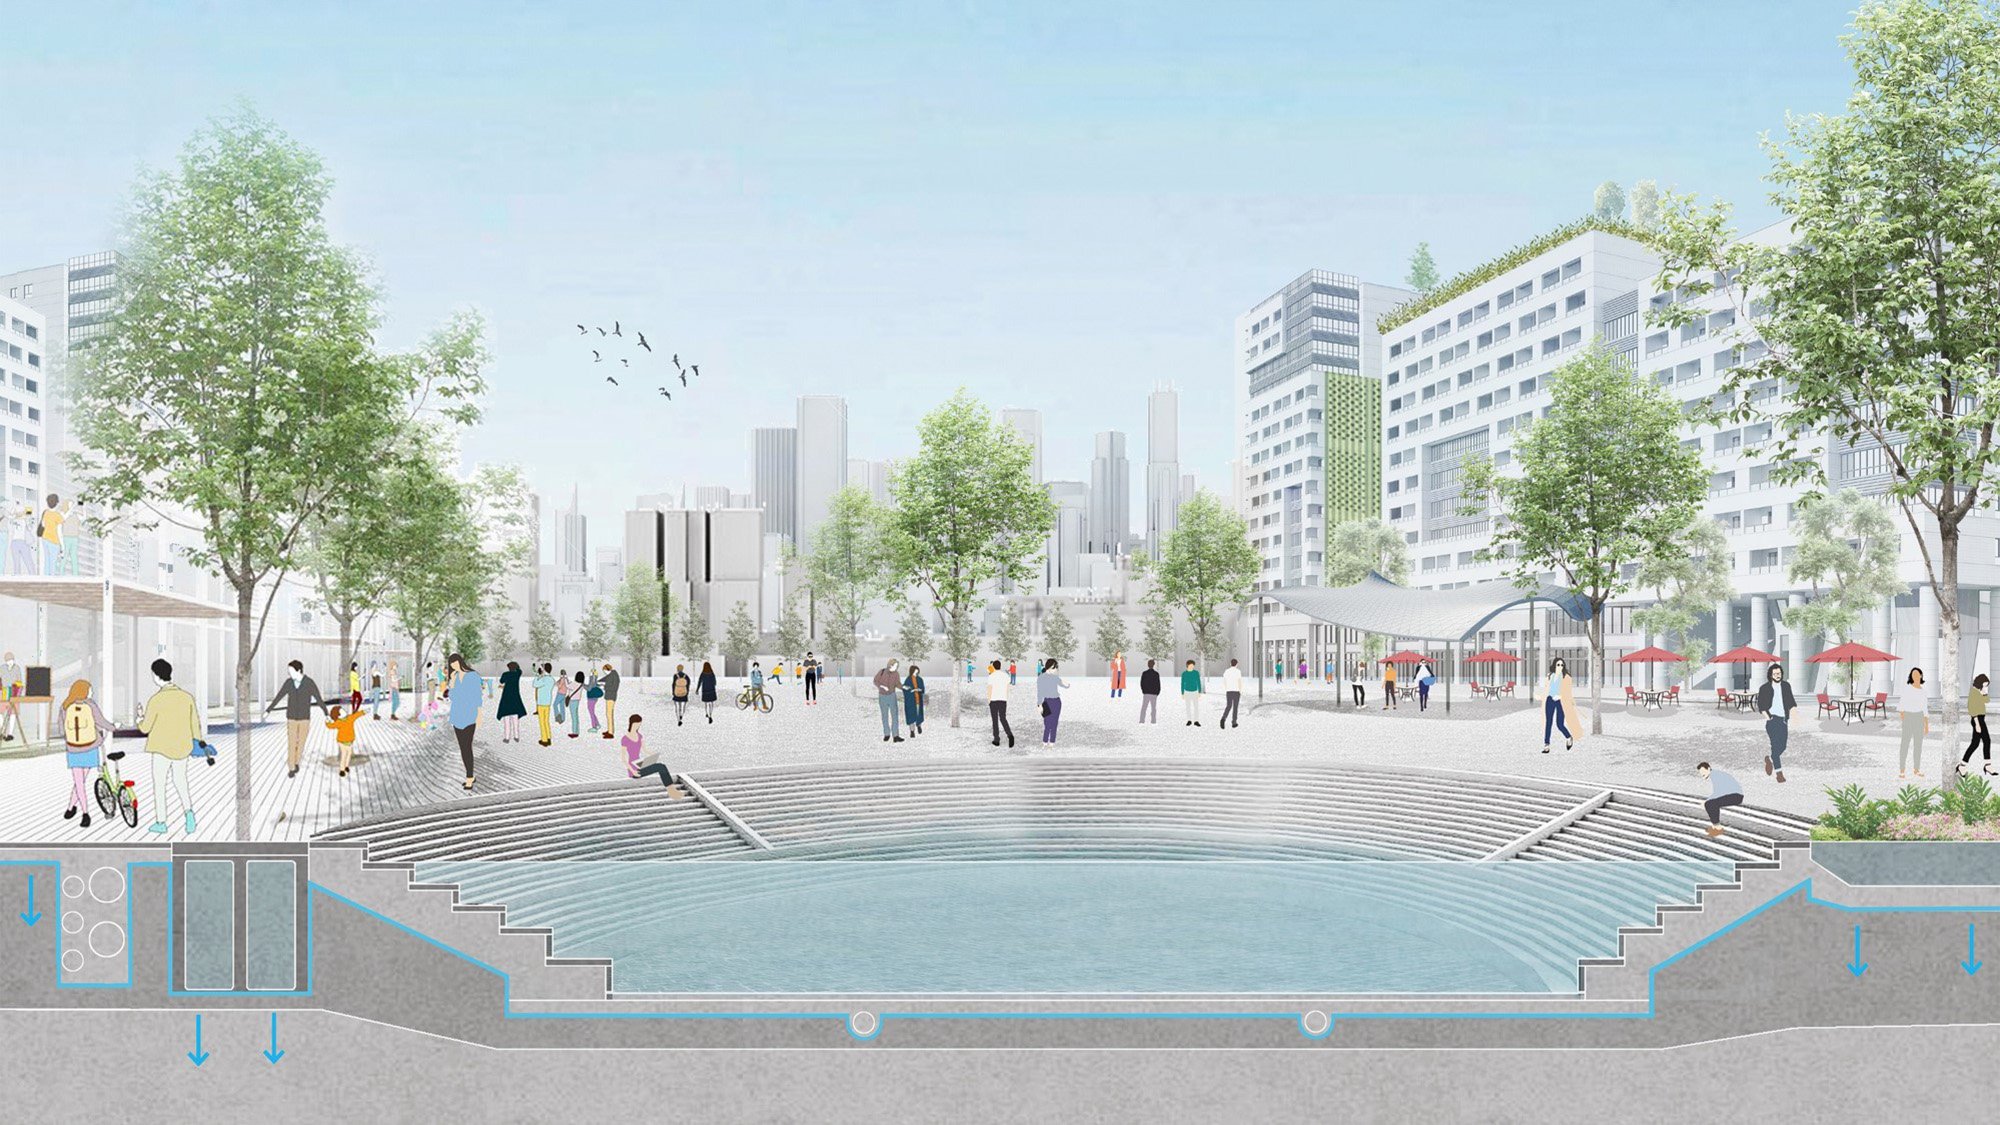 An urban square for everyday recreational use can also serve to store stormwater during flooding  © Arup